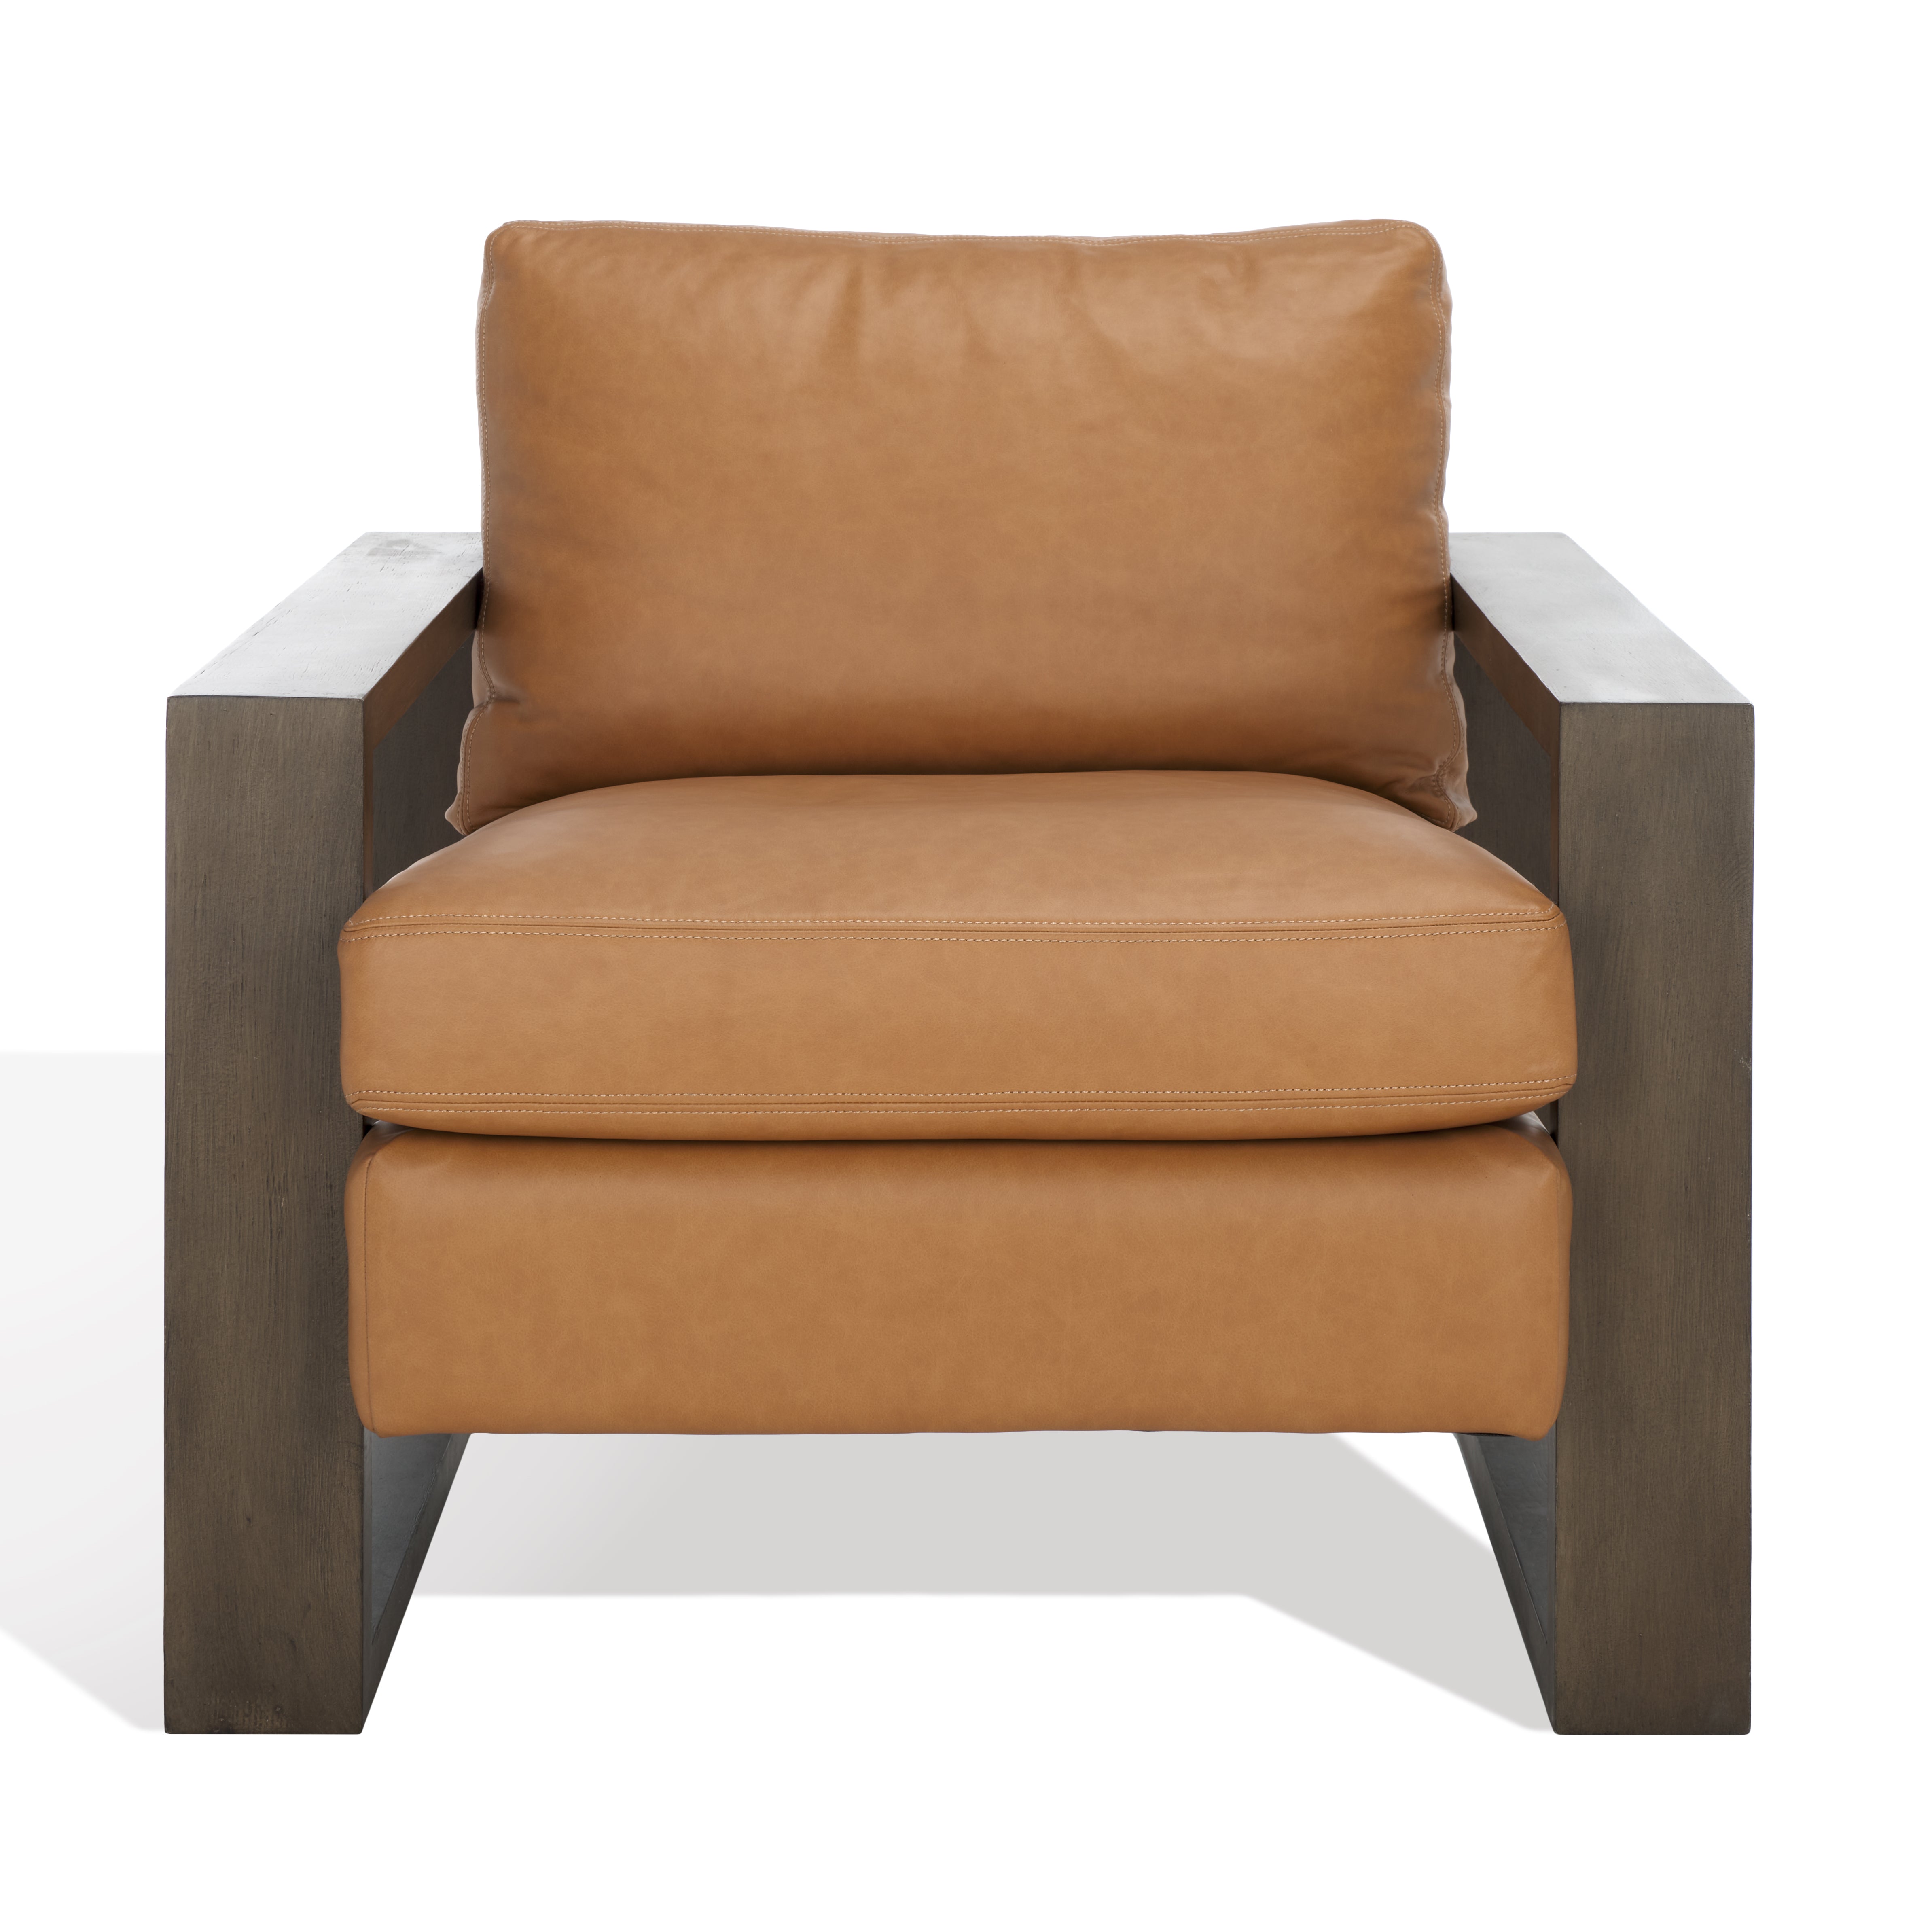 Safavieh Couture Tiana Mid Century Accent Chair - Light Brown